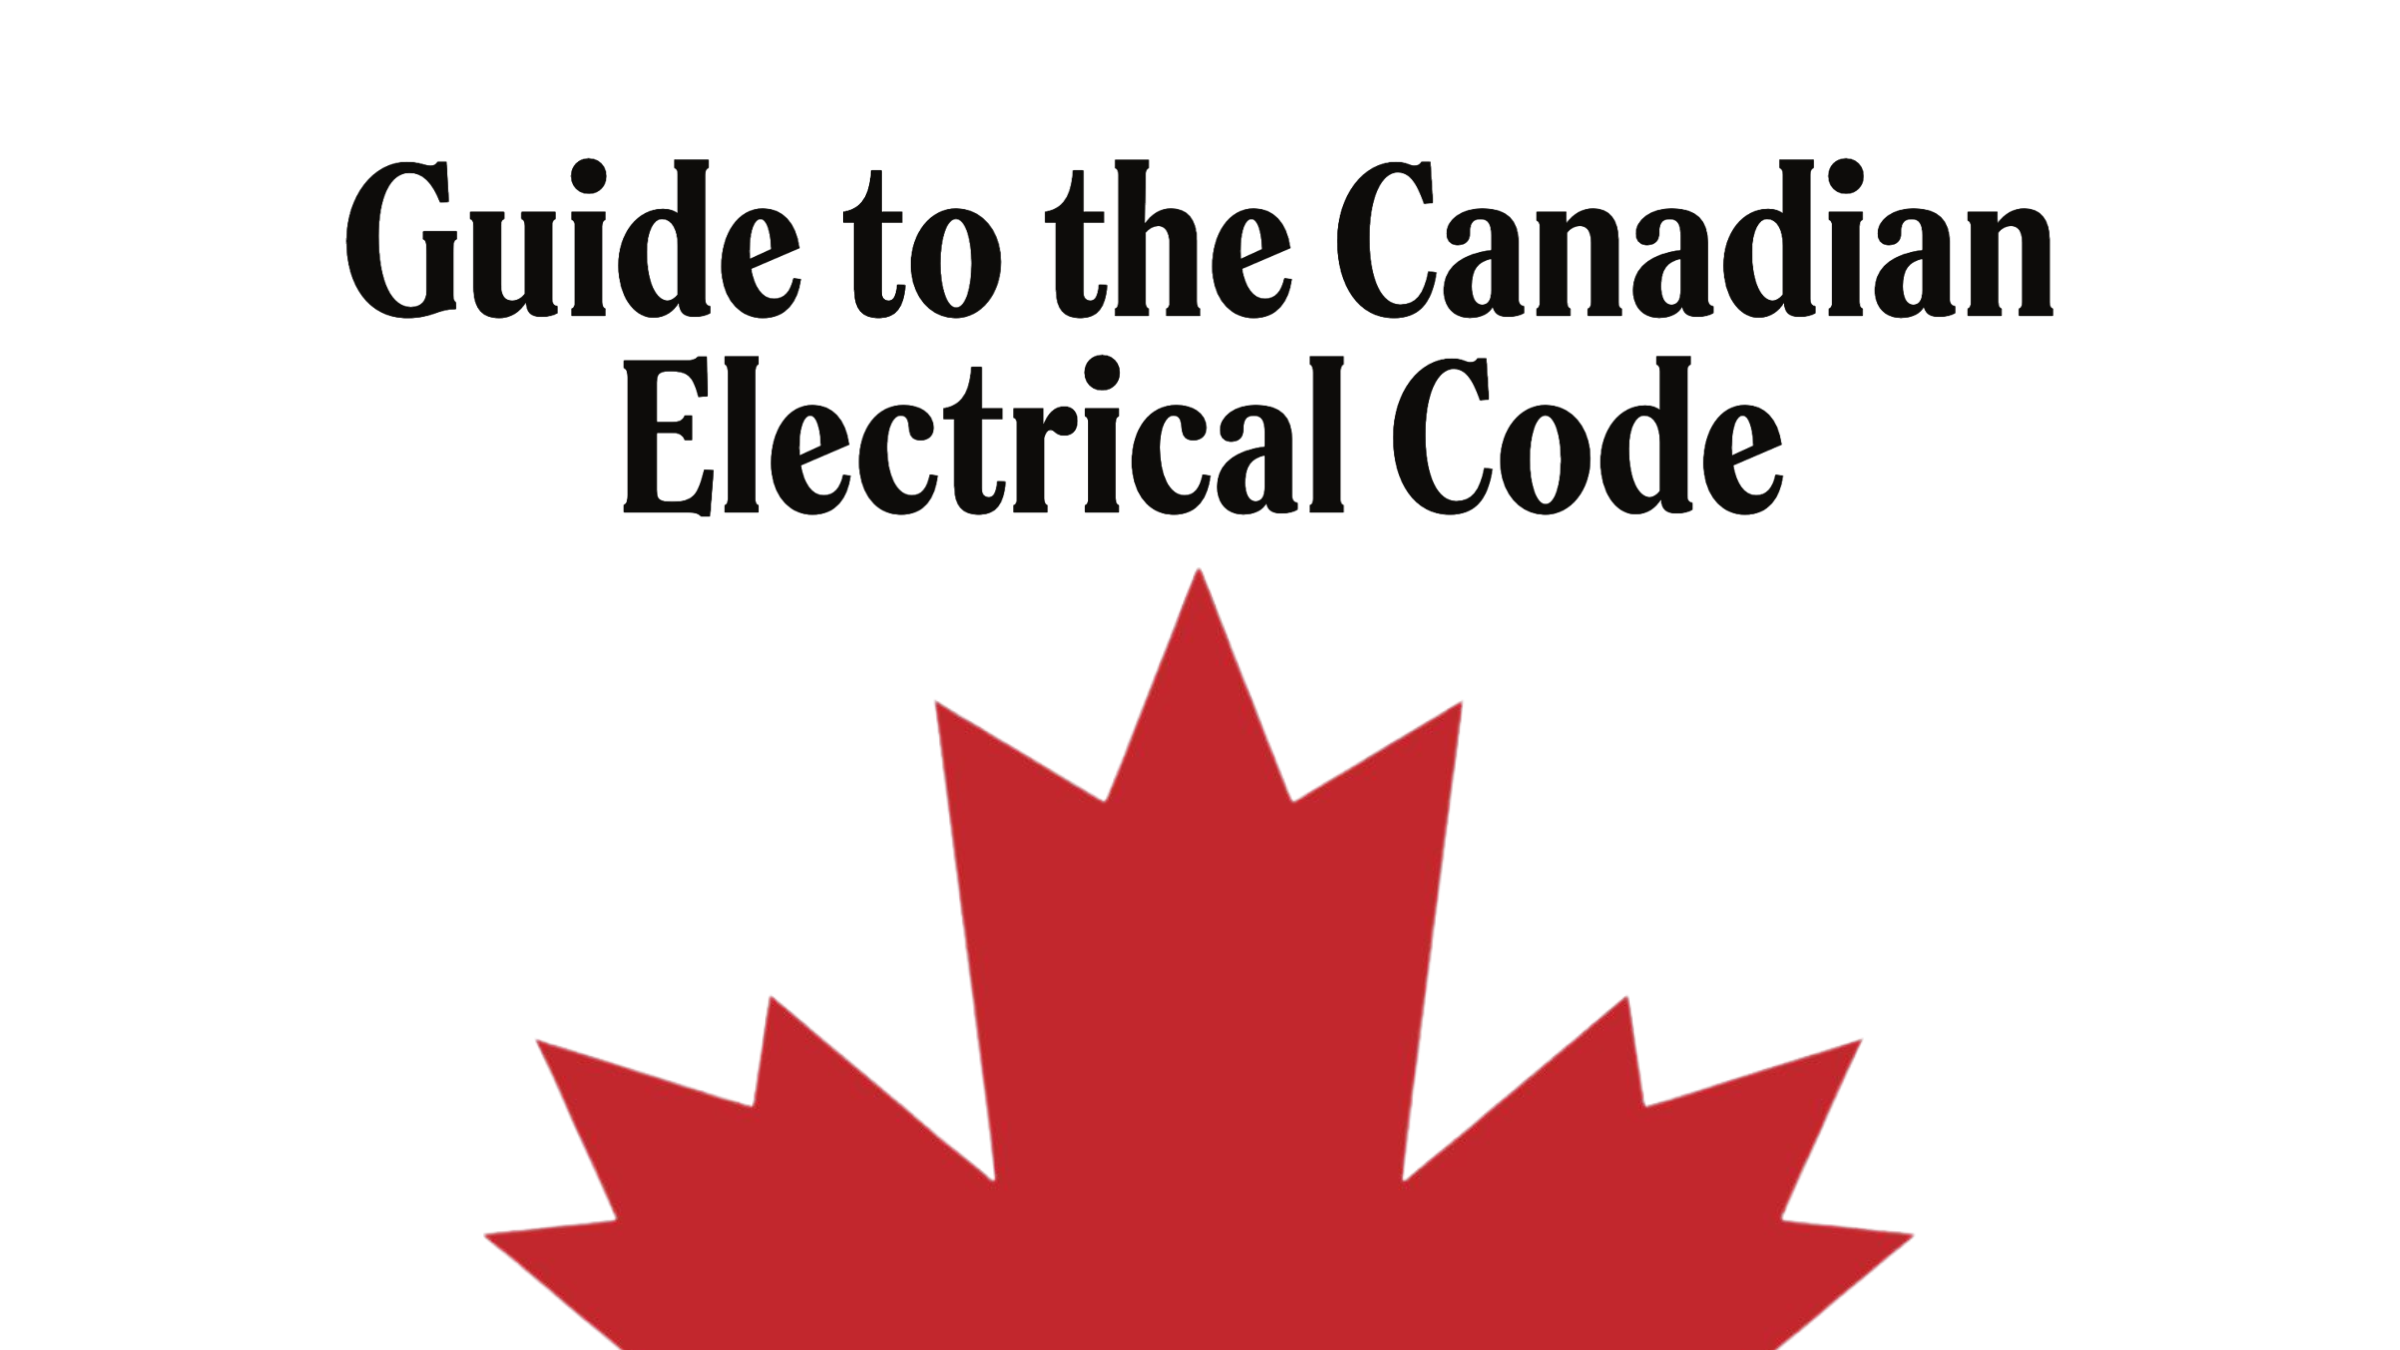 Guide to the Canadian Electrical Code, Part 1[i], 25th Edition– A Road Map: Diagrams and Appendices